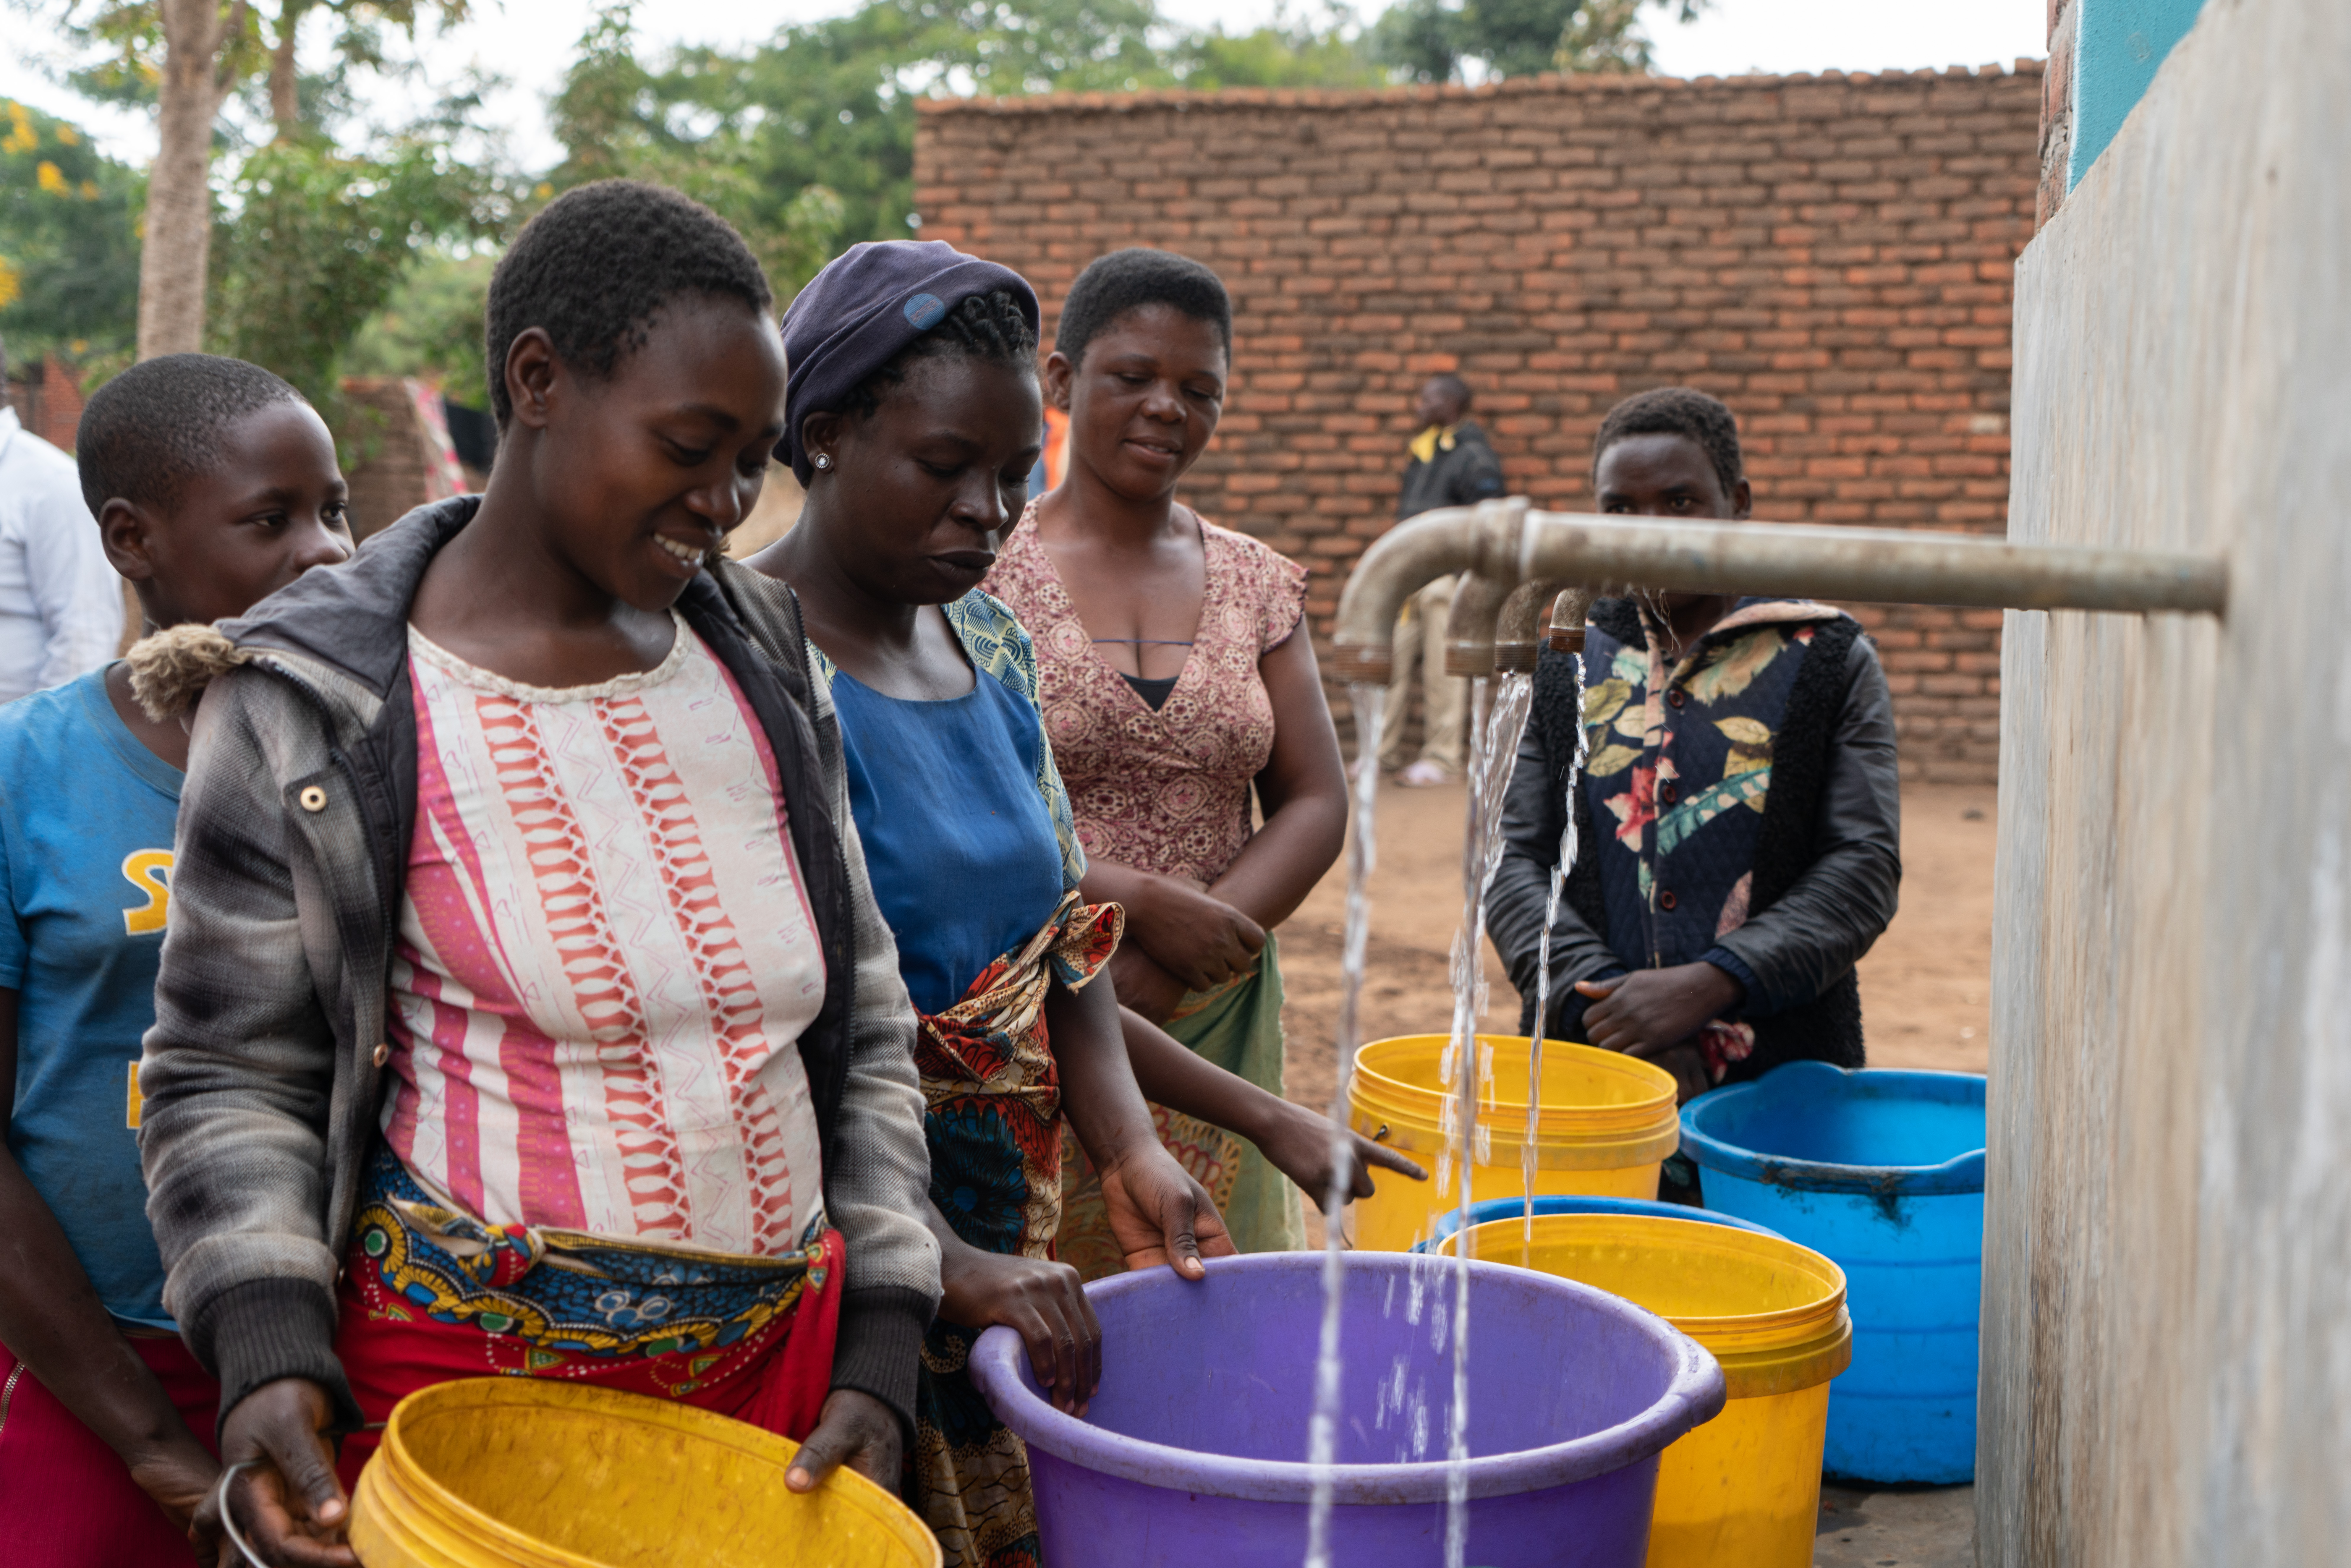 Women smiling as clean water runs from the taps of the new water kiosk in Chiswe village